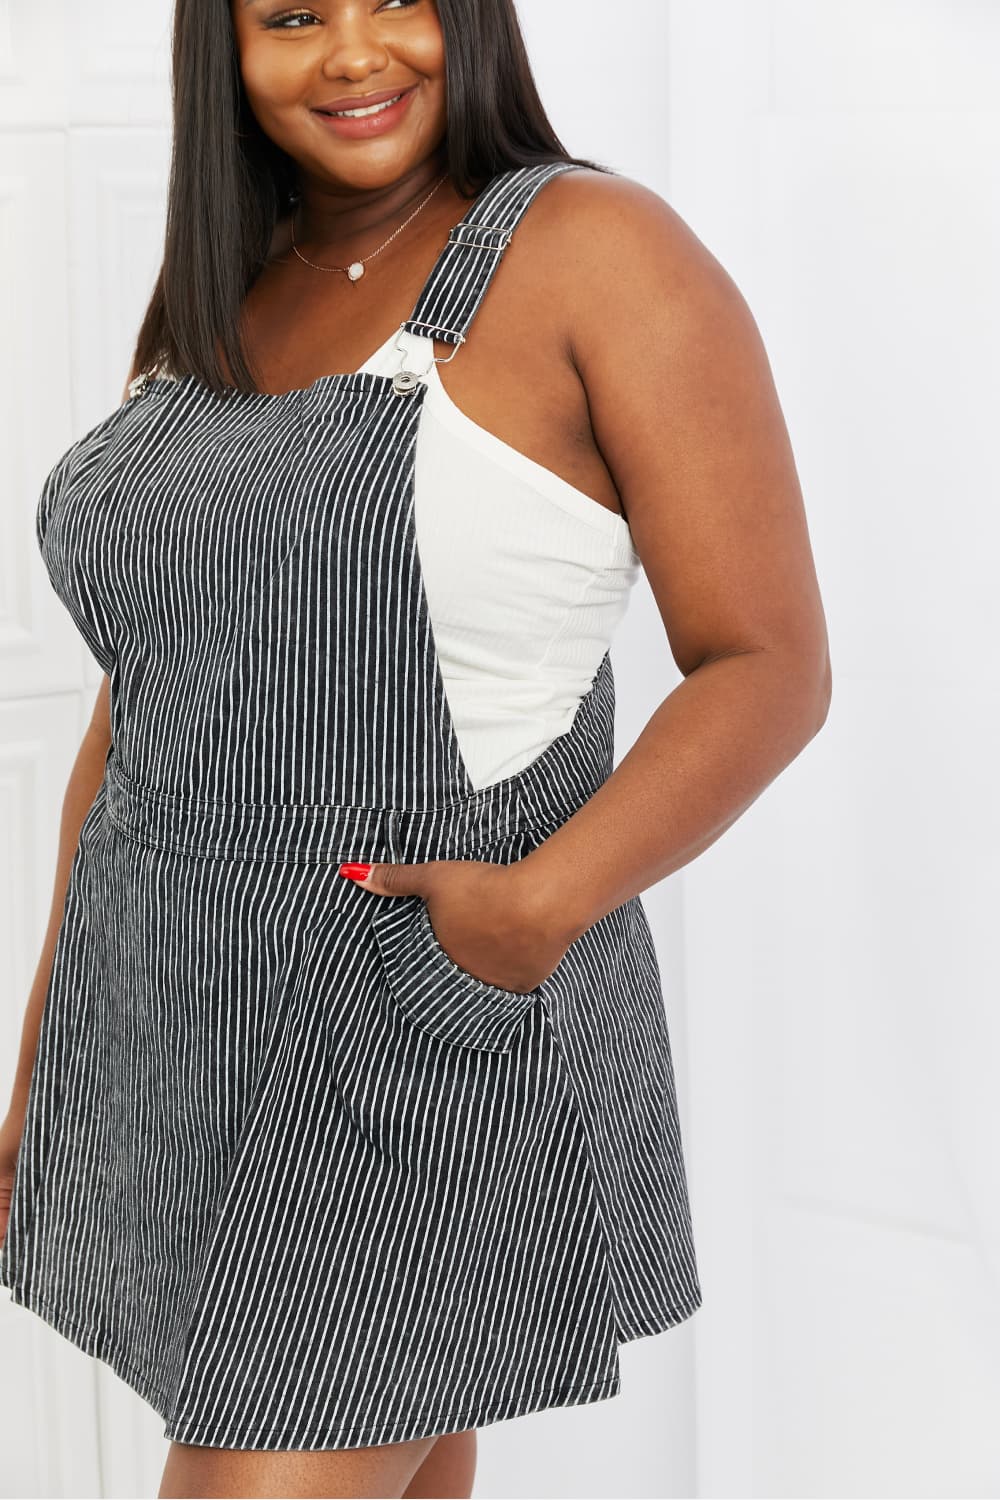 To The Park Overall Striped Skort Dress in Black  Southern Soul Collectives 